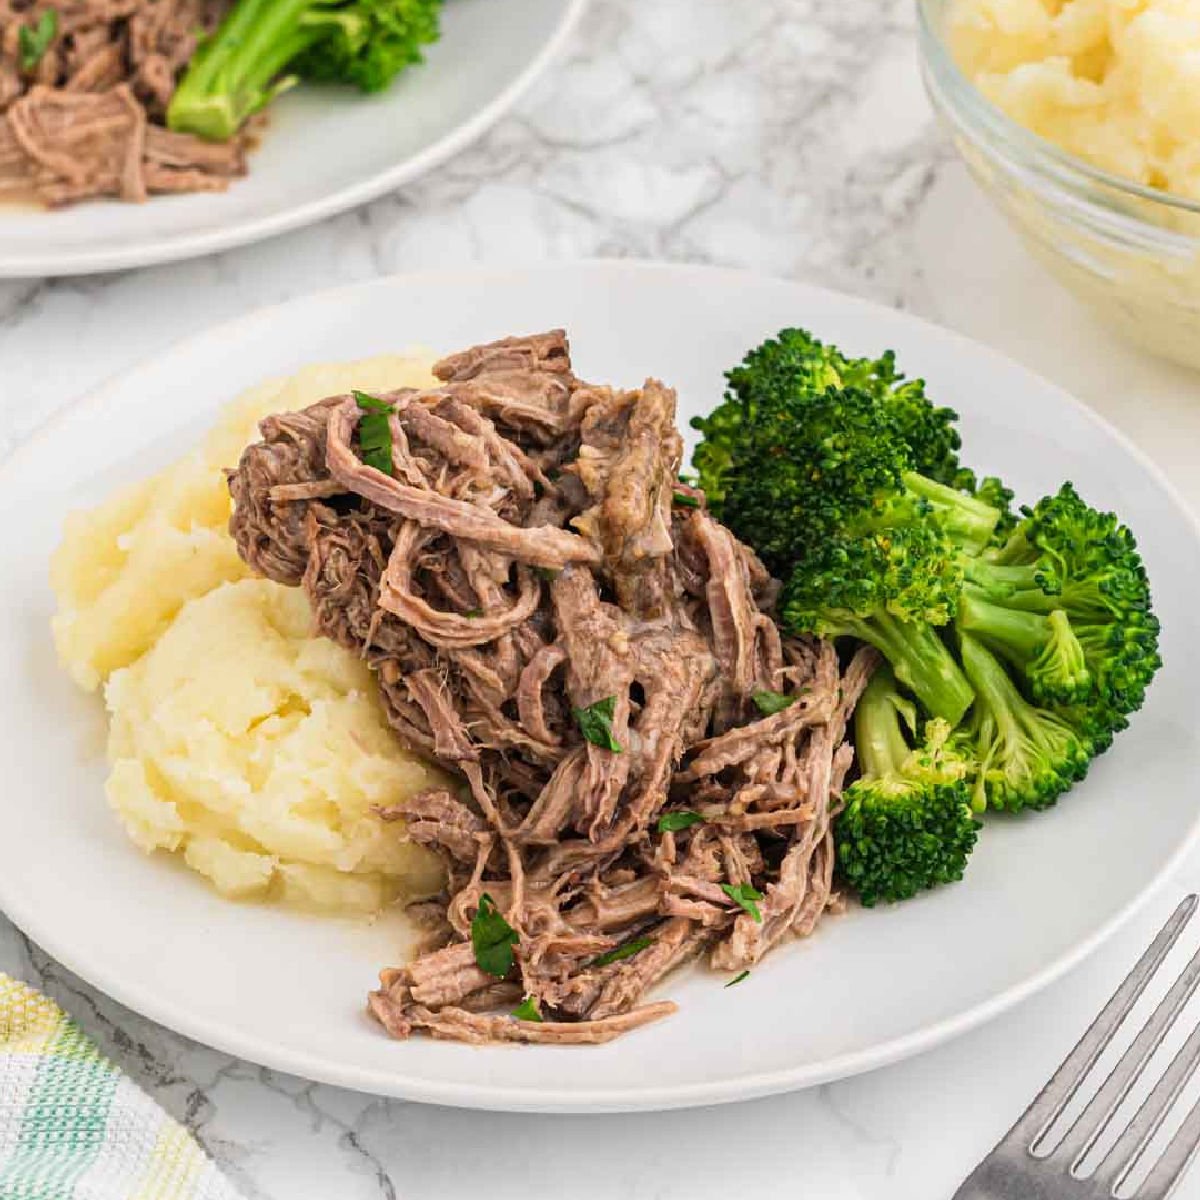 Close up image of shredded beef on a plate with mashed potatoes and broccoli